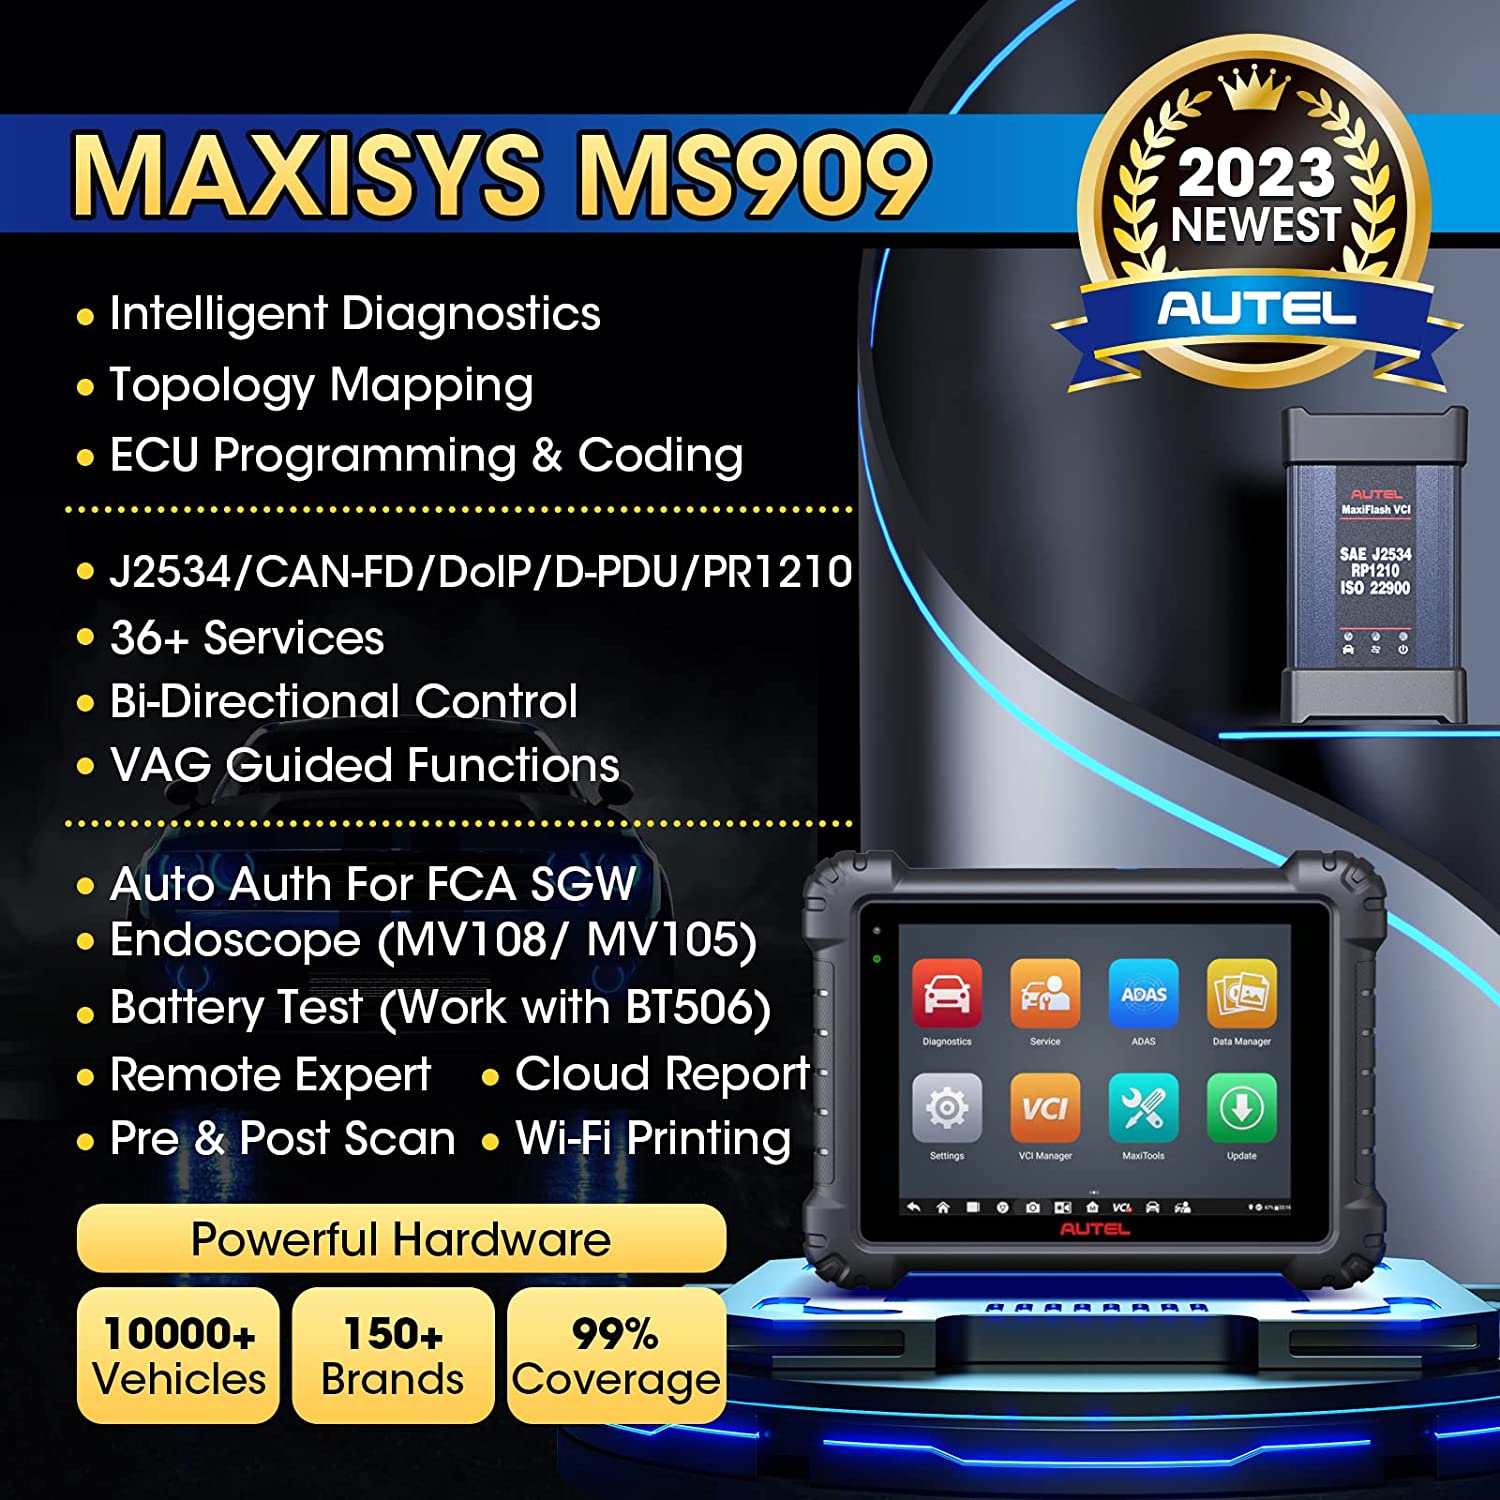 Autel MaxiSys MS909 Car Diagnostic Scan Tool ECU Programming  Coding, 36+  Services, Topology Map, Active Test Upgraded of Autel Elite MK908Pro  MS908S Pro